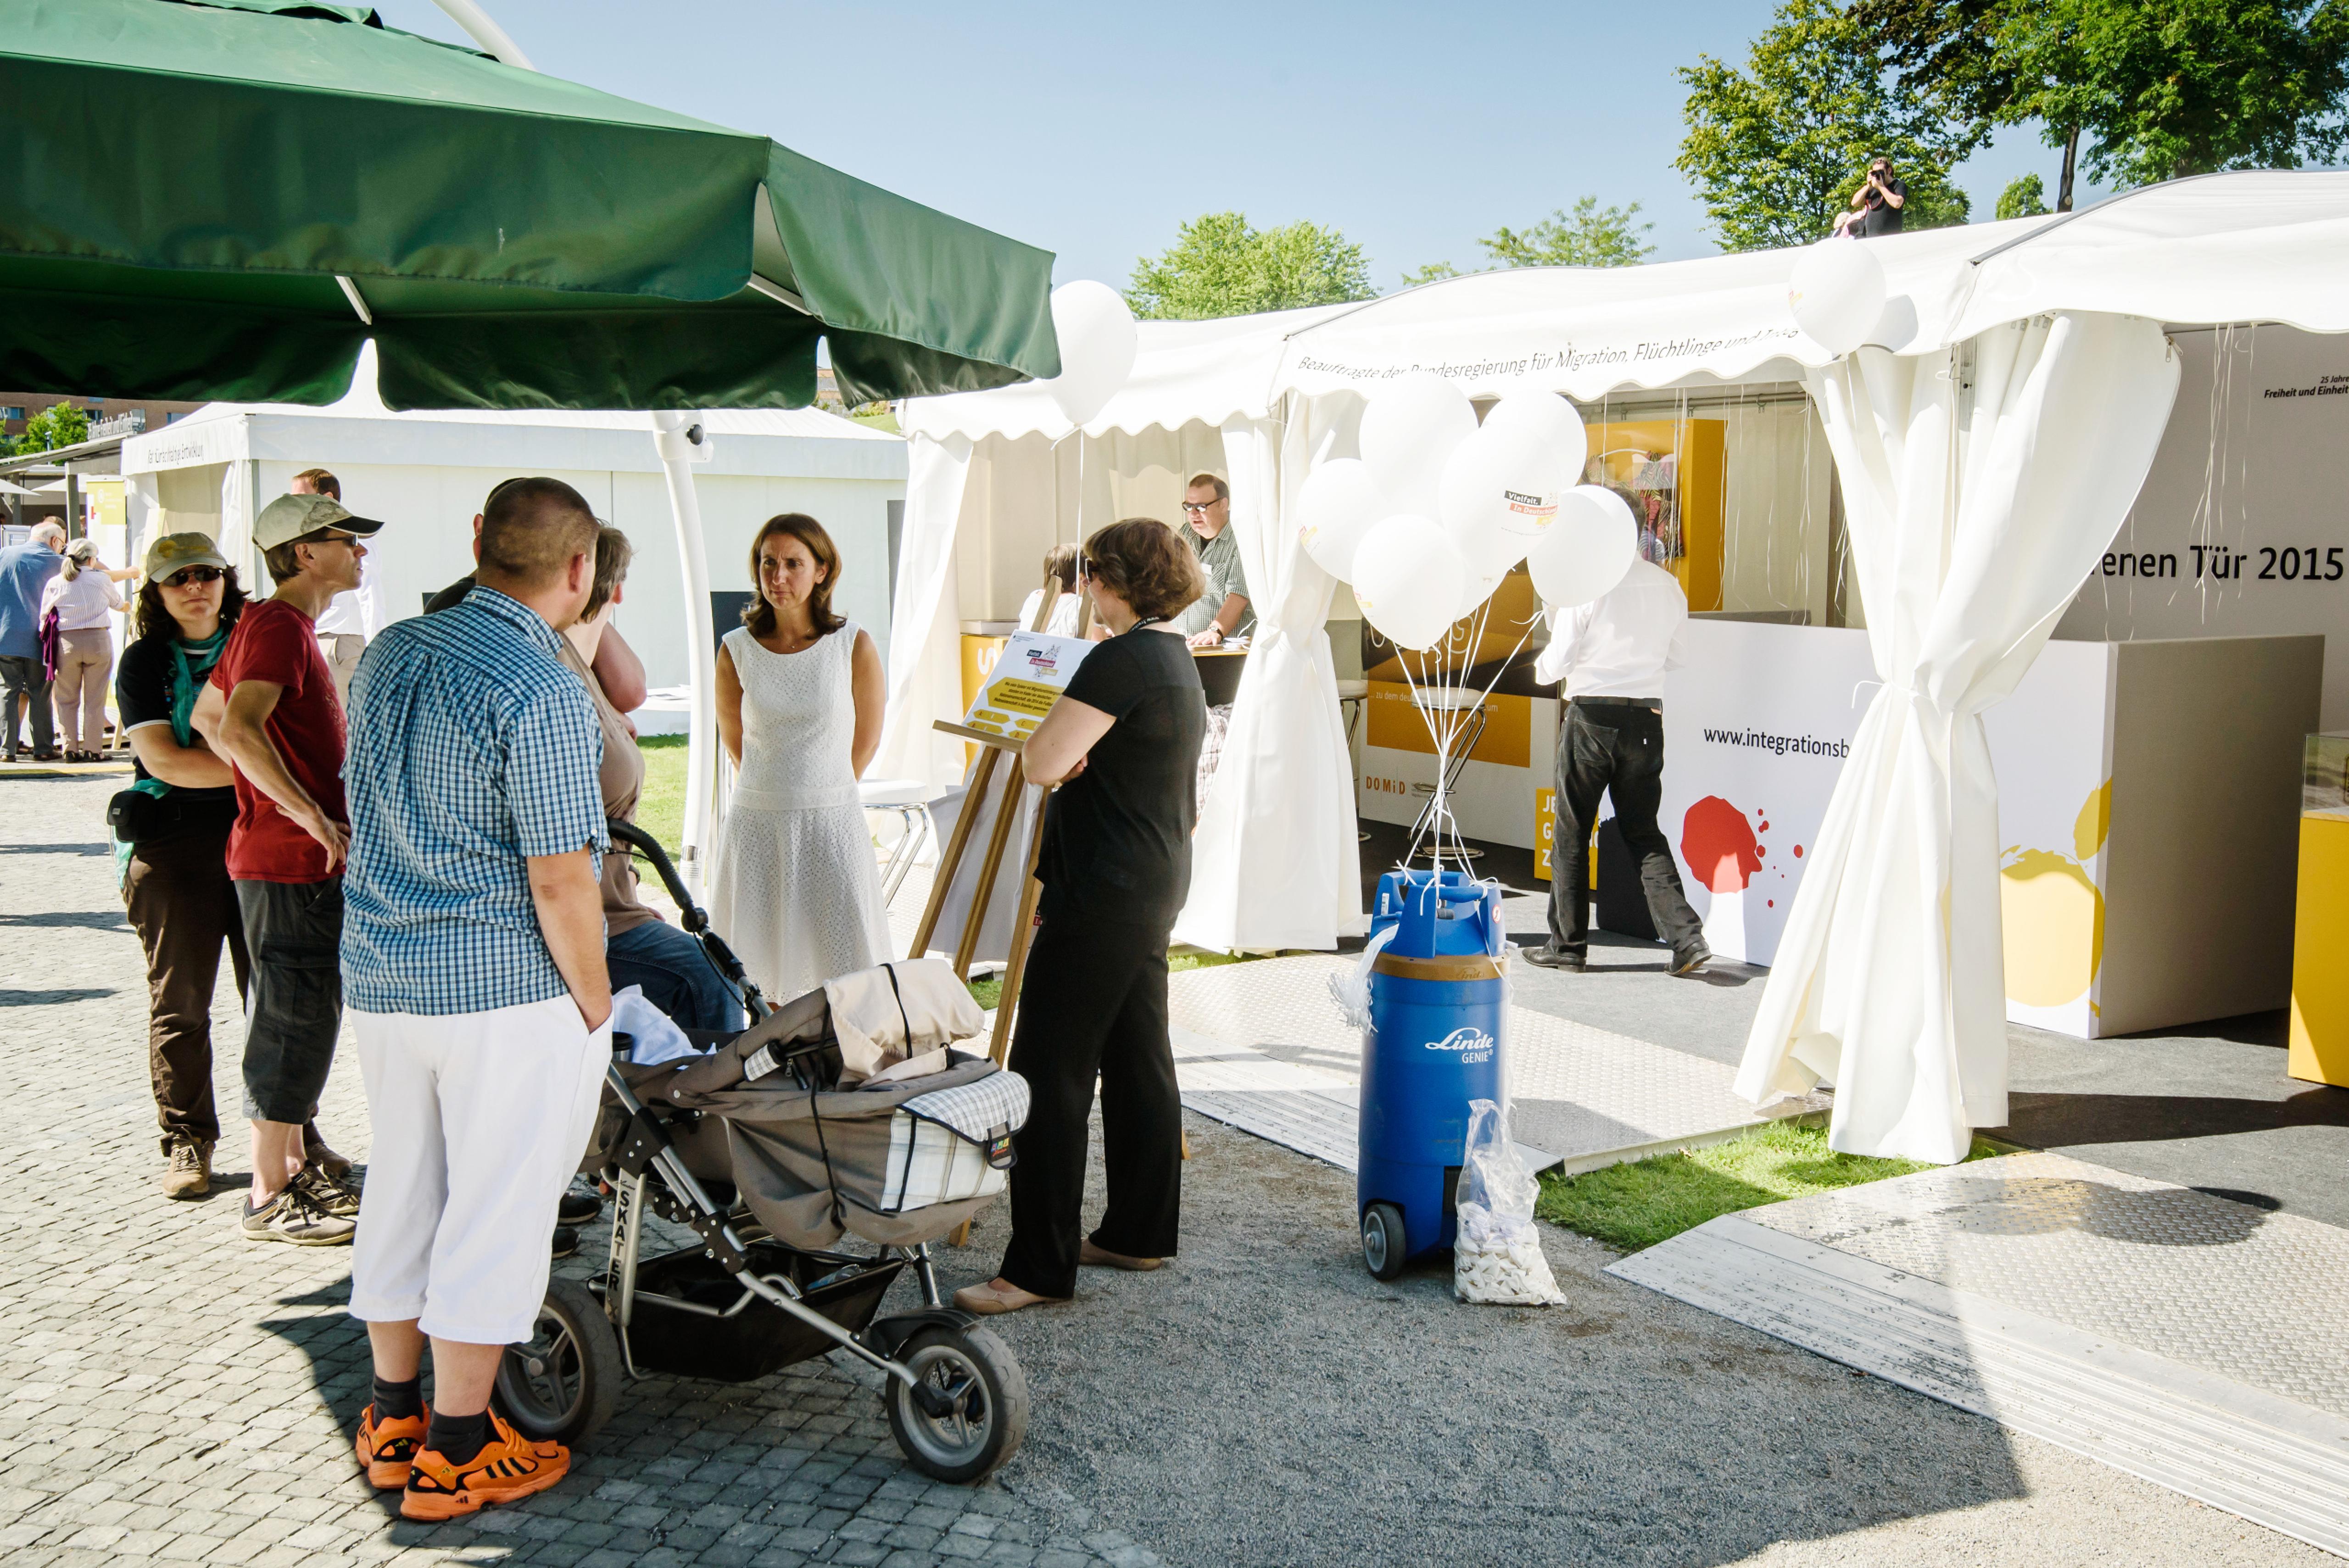 2015: On August 29 and 30, 2015, DOMiD was represented with a specially designed mobile exhibition unit at the Federal Government's Open Day. Prominently placed right next to the booth of Aydan Özoğuz, the Minister of State for Migration, Refugees and Integration, members of the board and the office together were able to inspire thousands of visitors* about DOMiD's project. Photo: DOMiD Archive, Cologne